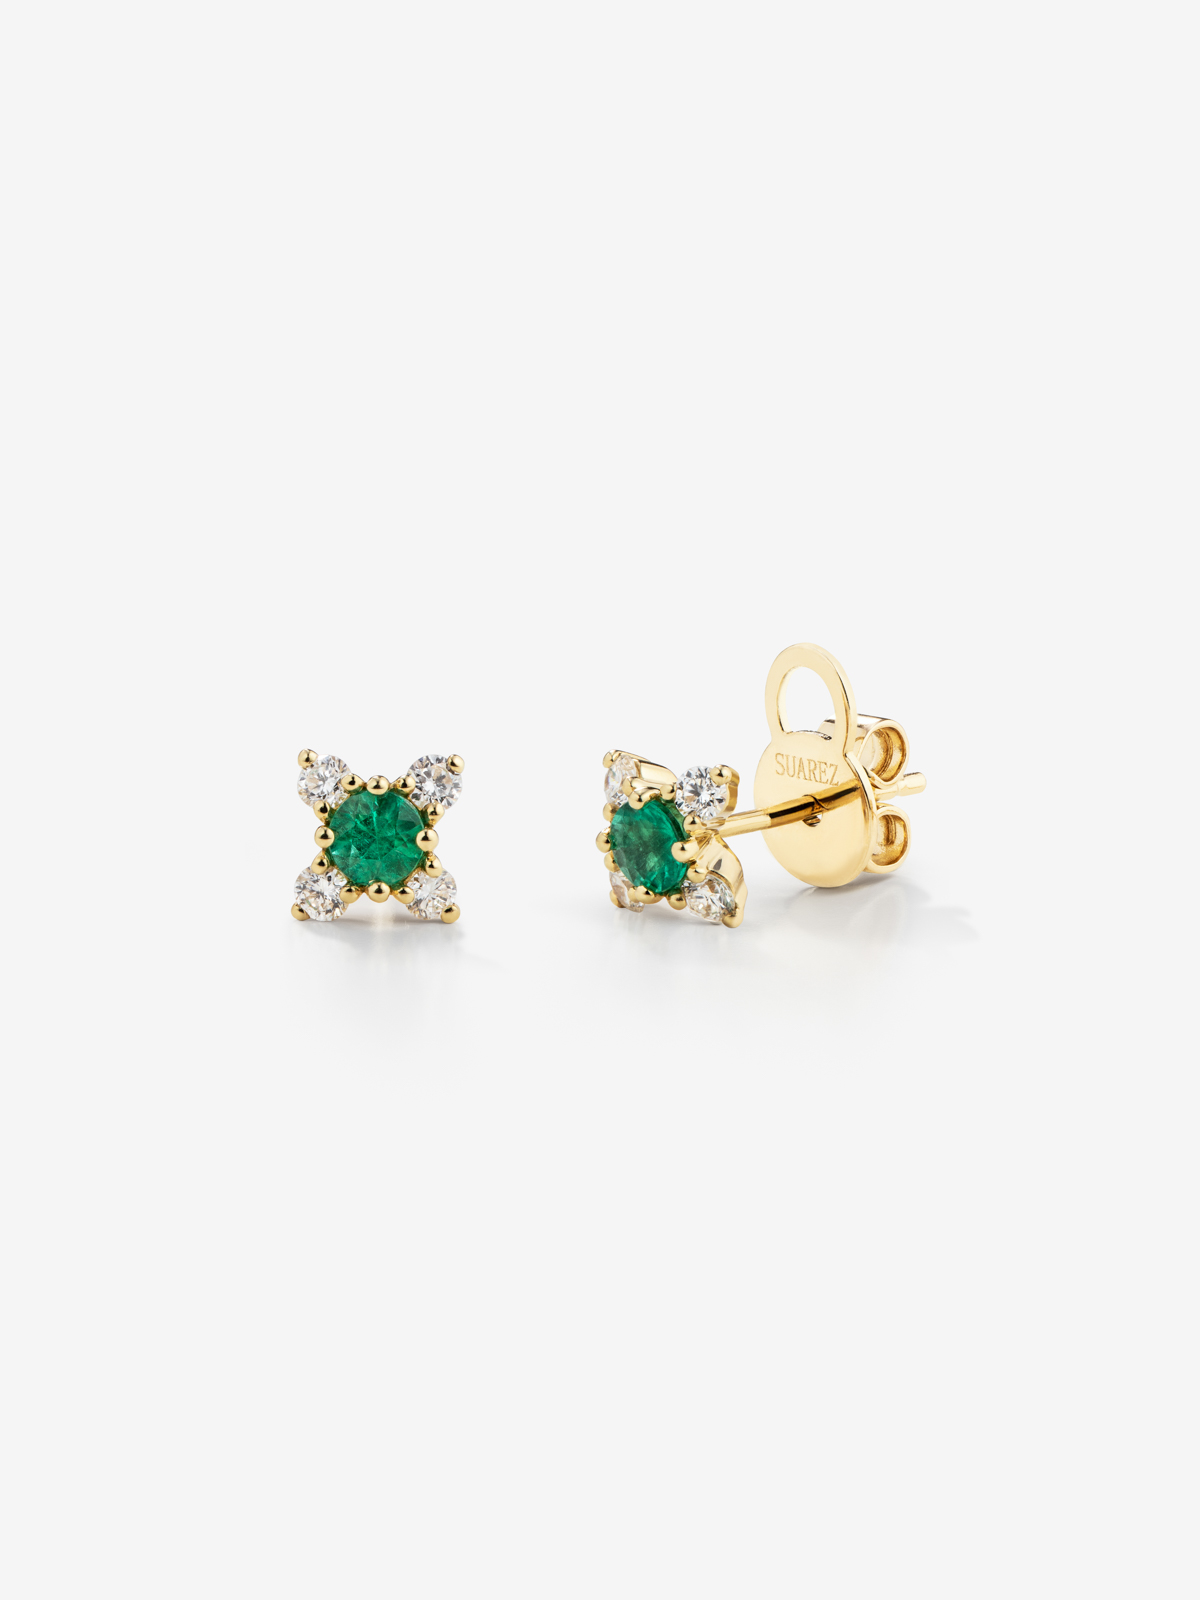 18K yellow gold flower earrings with emerald and diamonds.